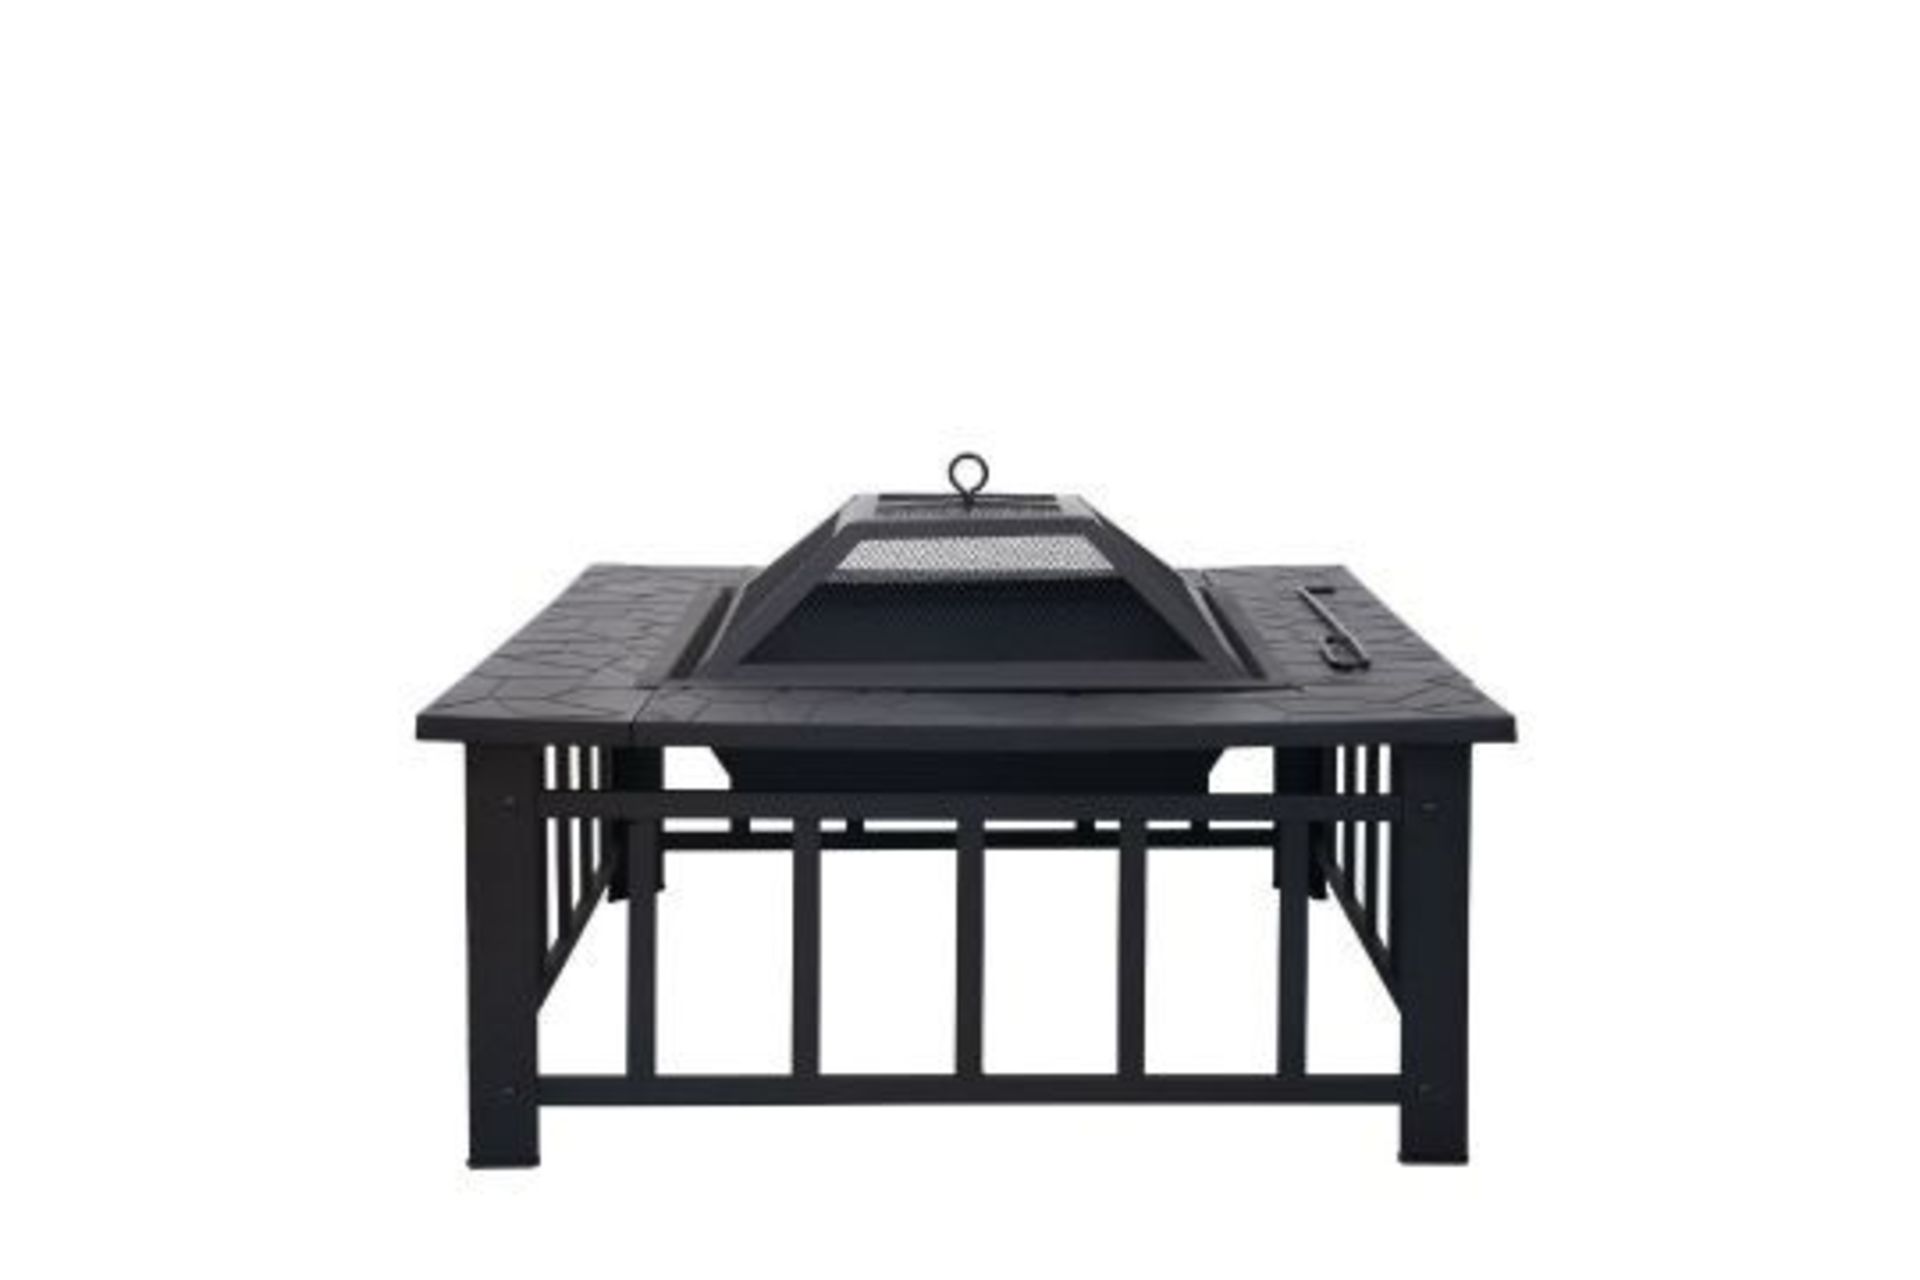 PALLET TO CONTAIN 5 x New Boxed Outdoor 3 in 1 BBQ, Large Firepit, Ice Bucket & Garden Square Table. - Image 2 of 3